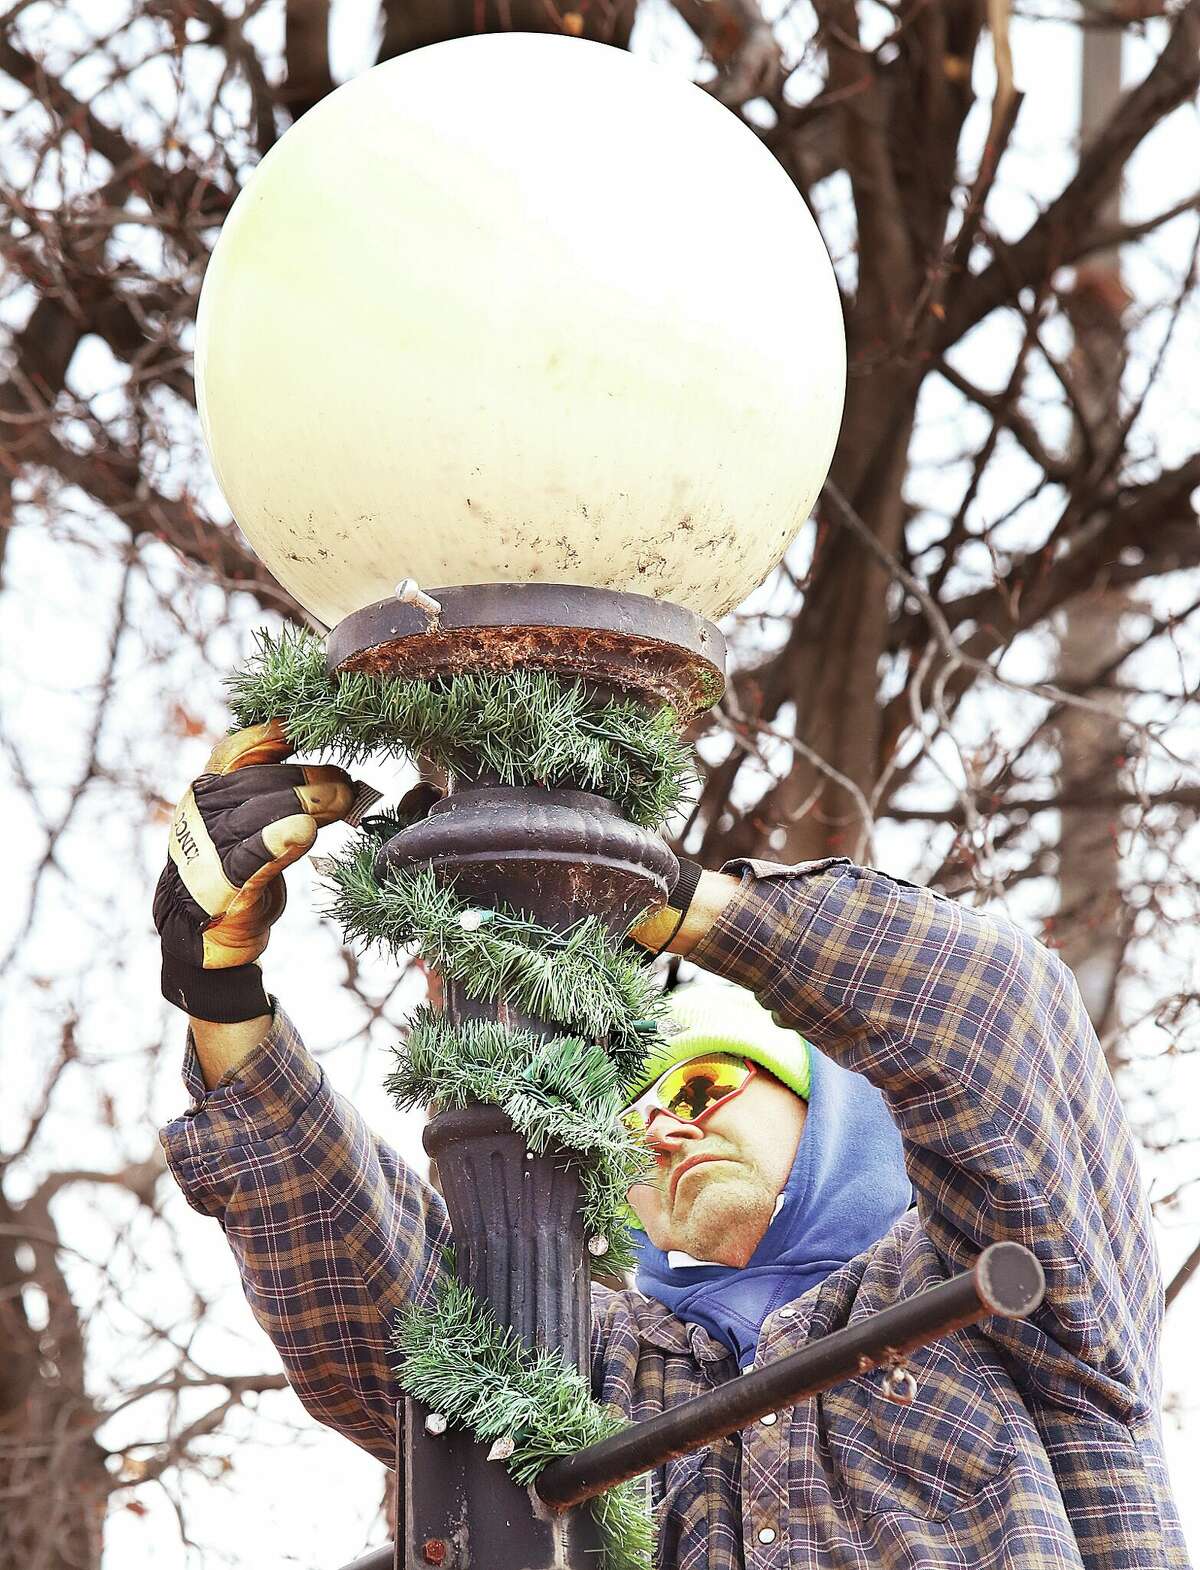 John Badman|The Telegraph An Alton Park and Recreation Department employee works to wrap the decorative light pole in Lincoln-Douglas Square with lighted garland Wednesday as the square is prepared for the 28th Annual Community Tree Lighting on Friday. Santa Claus will arrive again this year by trolley at 6 p.m. and the free event includes cookies, hot cocoa and caroling. Alton Mayor David Goins will light the brand new Christmas tree, provided by the Alton-Godfrey Rotary Club, at 6:45 p.m. Trolley rides will be offered 5:30-7:30 p.m. and carriage rides will be available 7-9 p.m.